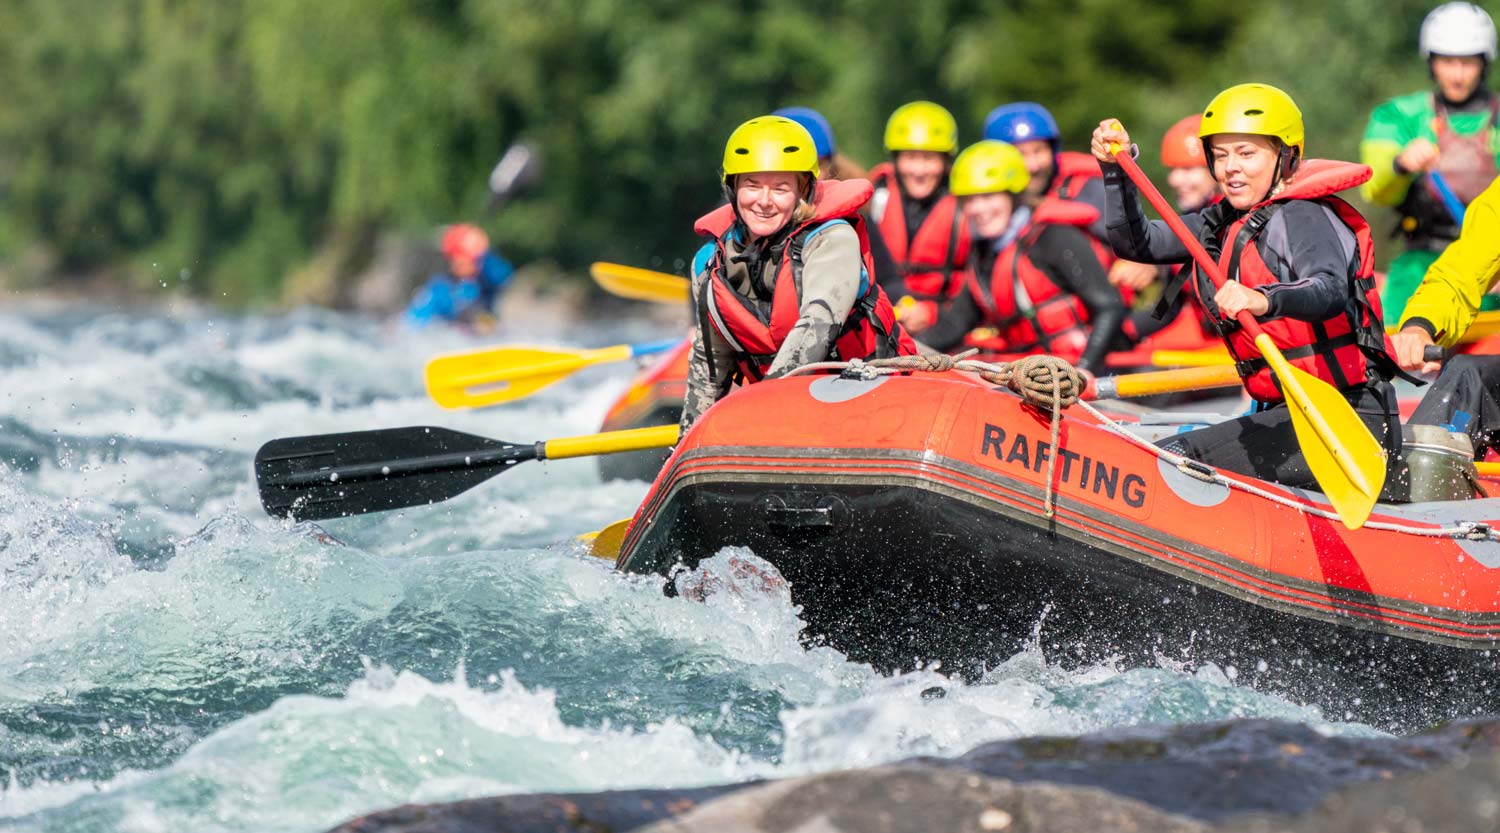 Photo showing people whitewater rafting